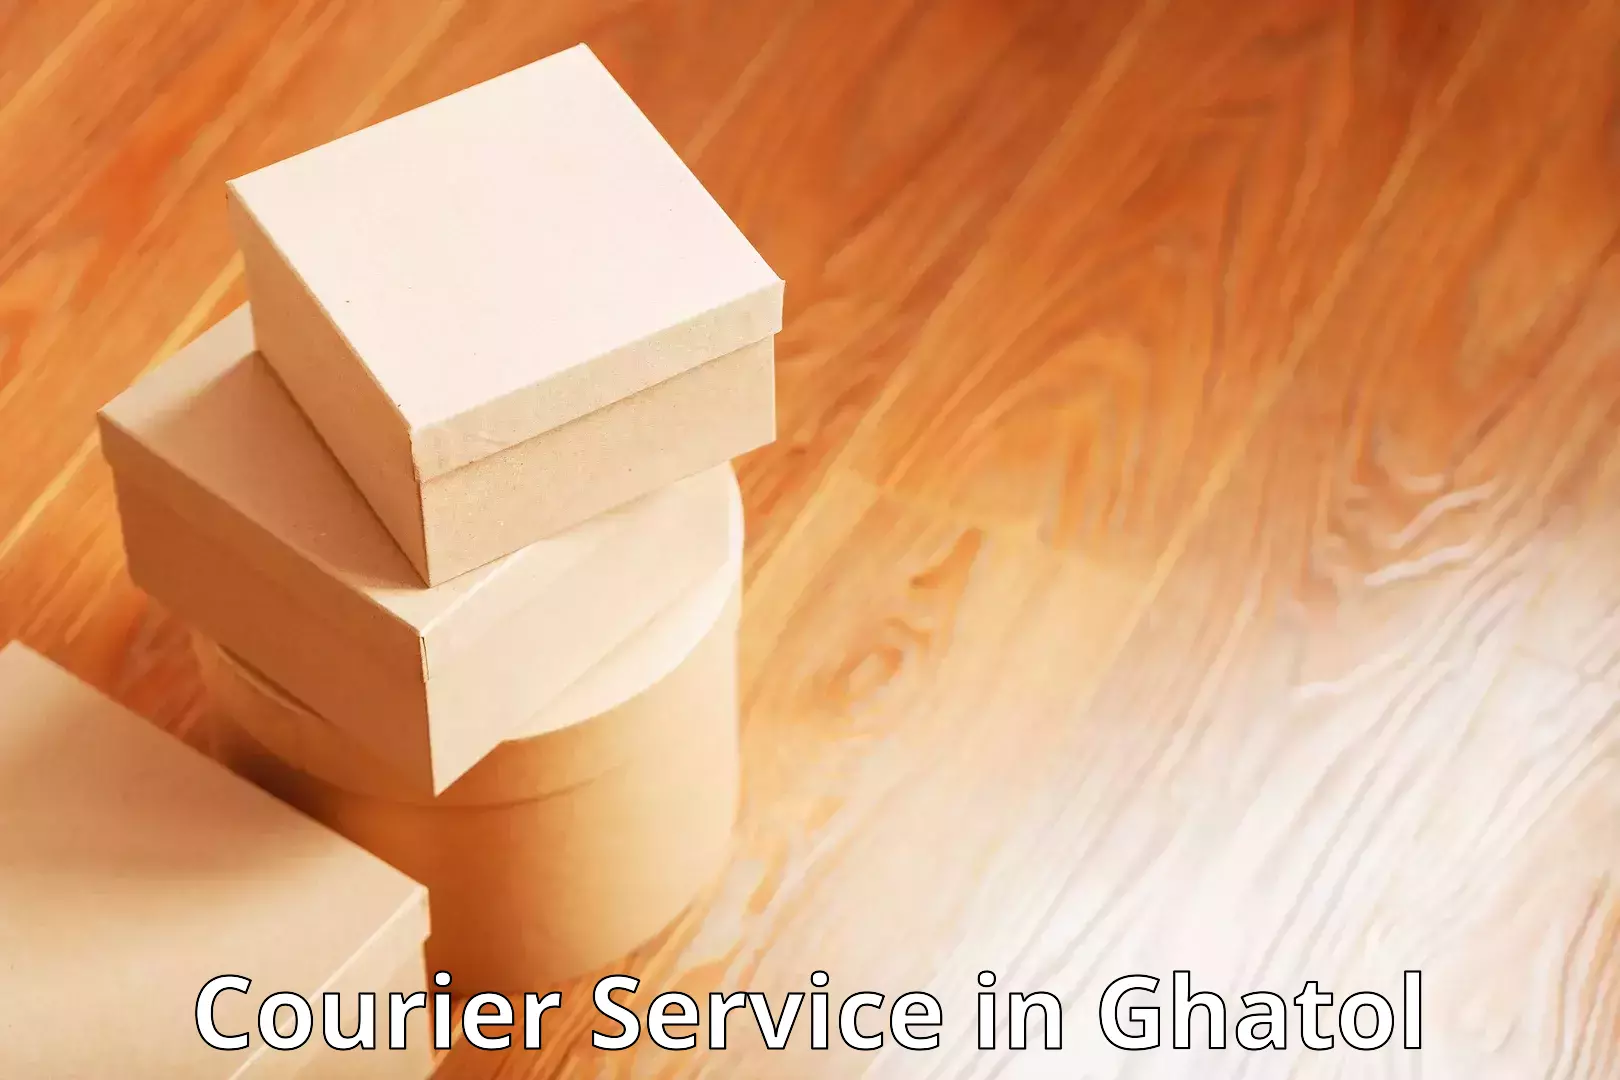 Fast delivery service in Ghatol